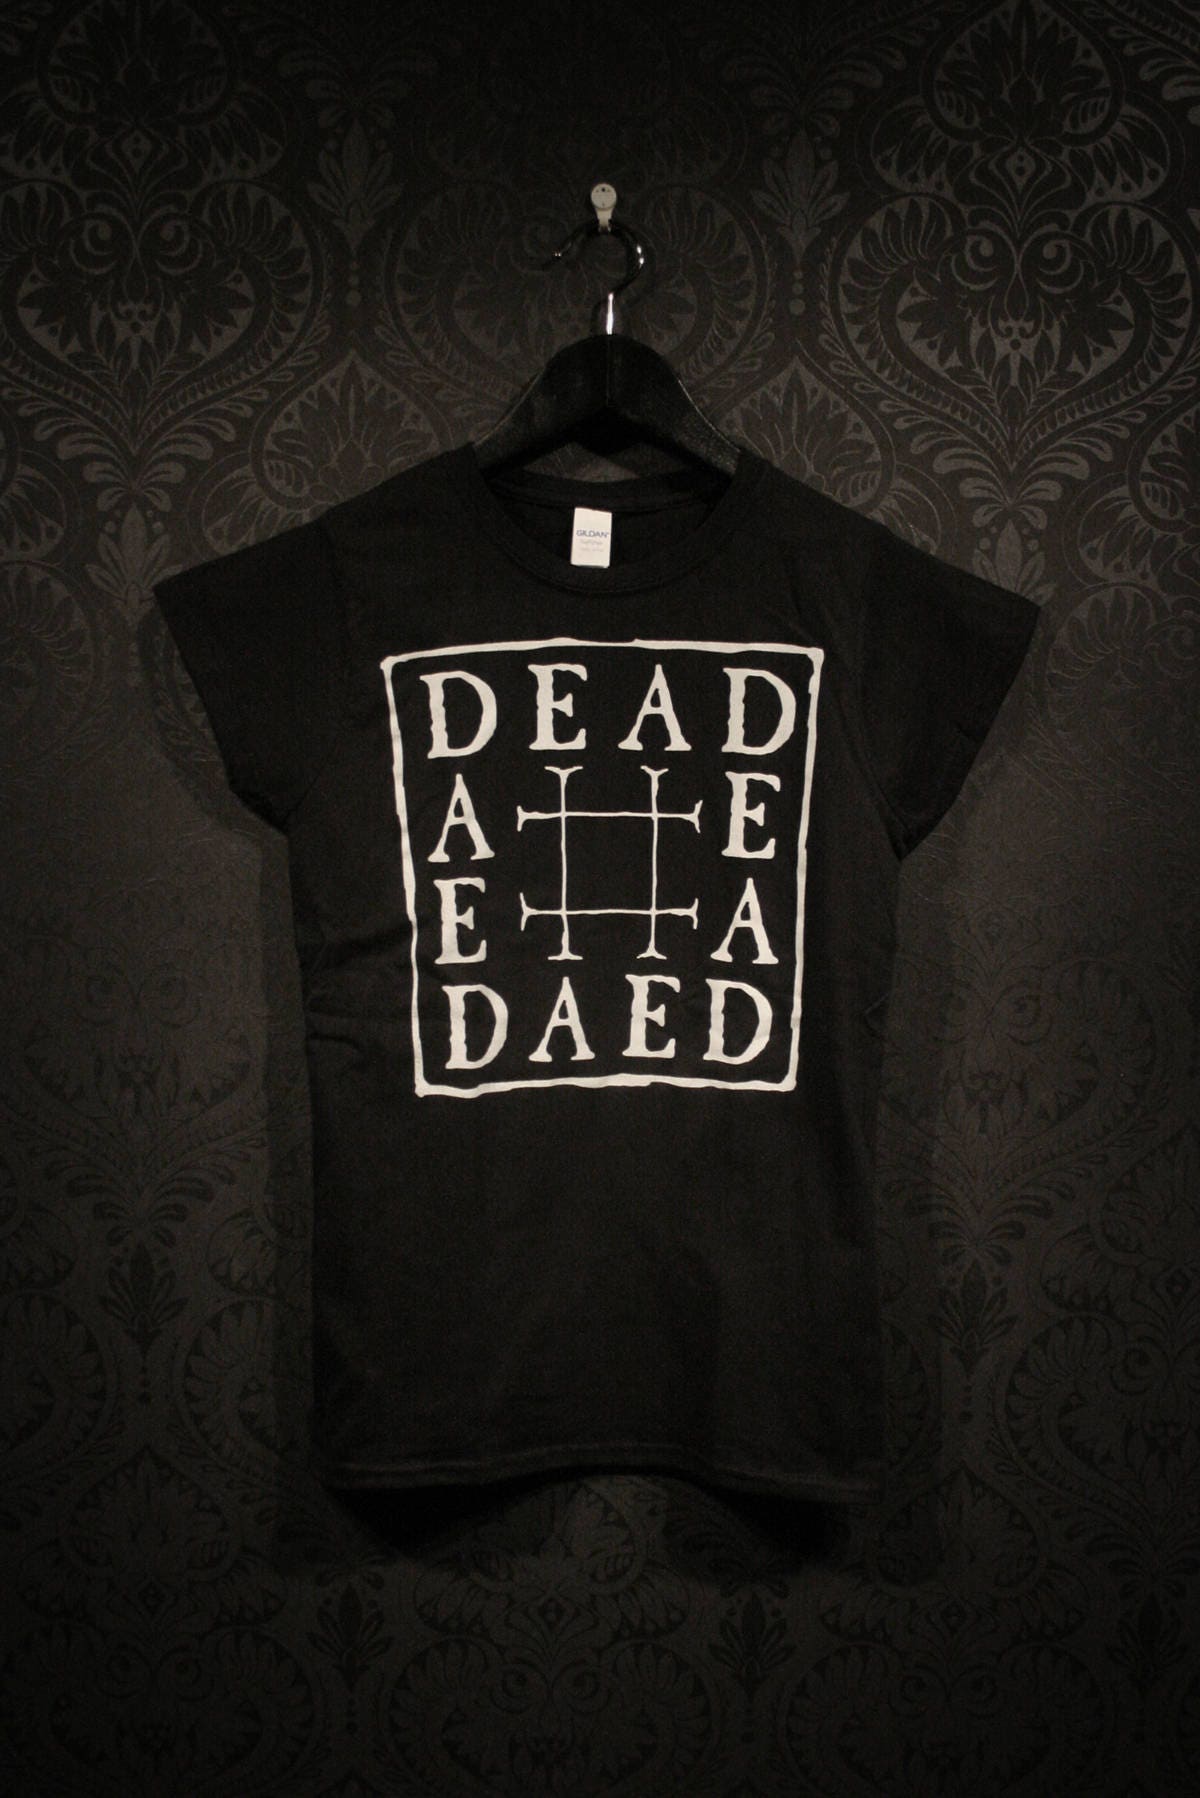 DEAD - DAED - T-shirt female fitted